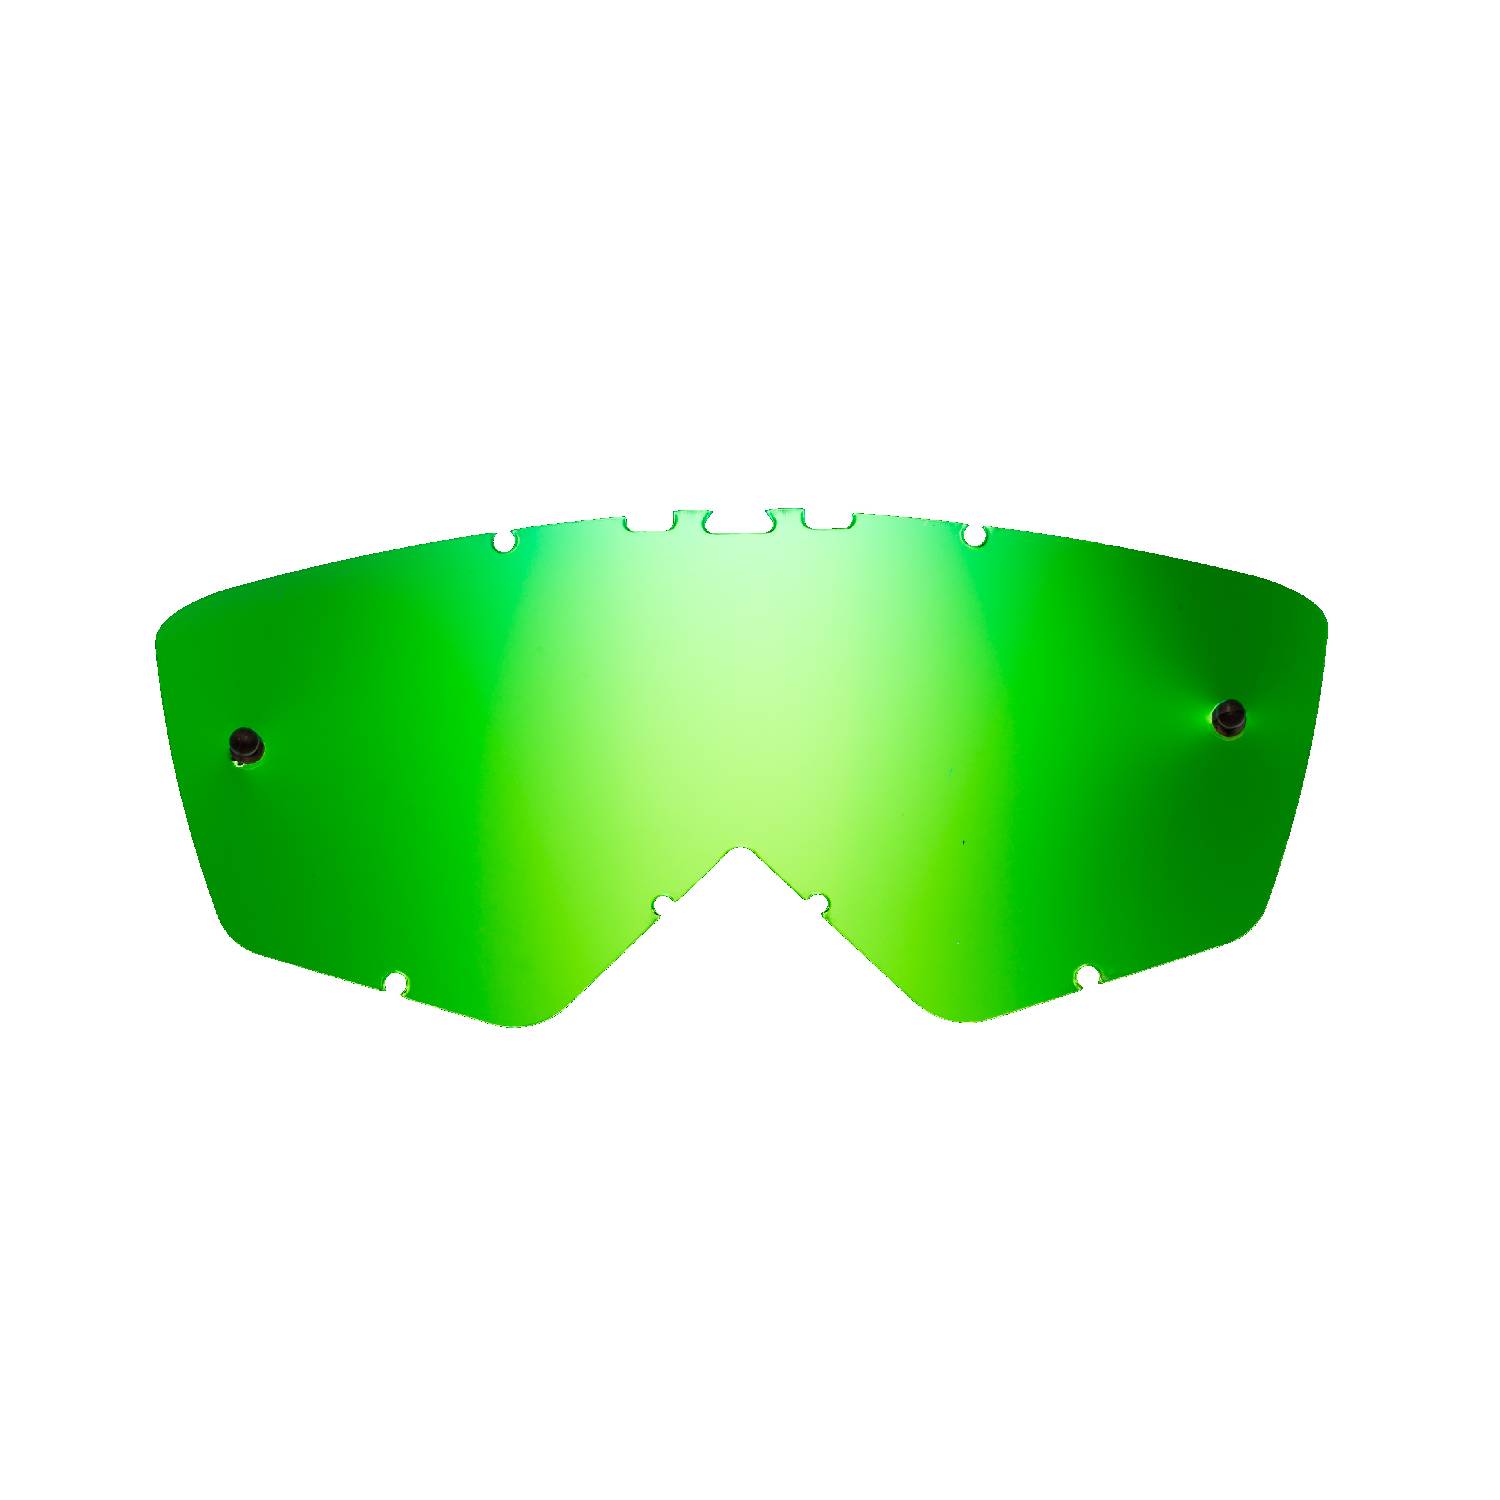 toned mirrored replacement lenses for goggles compatible for Ariete Andrenaline RC07 / Ride And Roll goggle